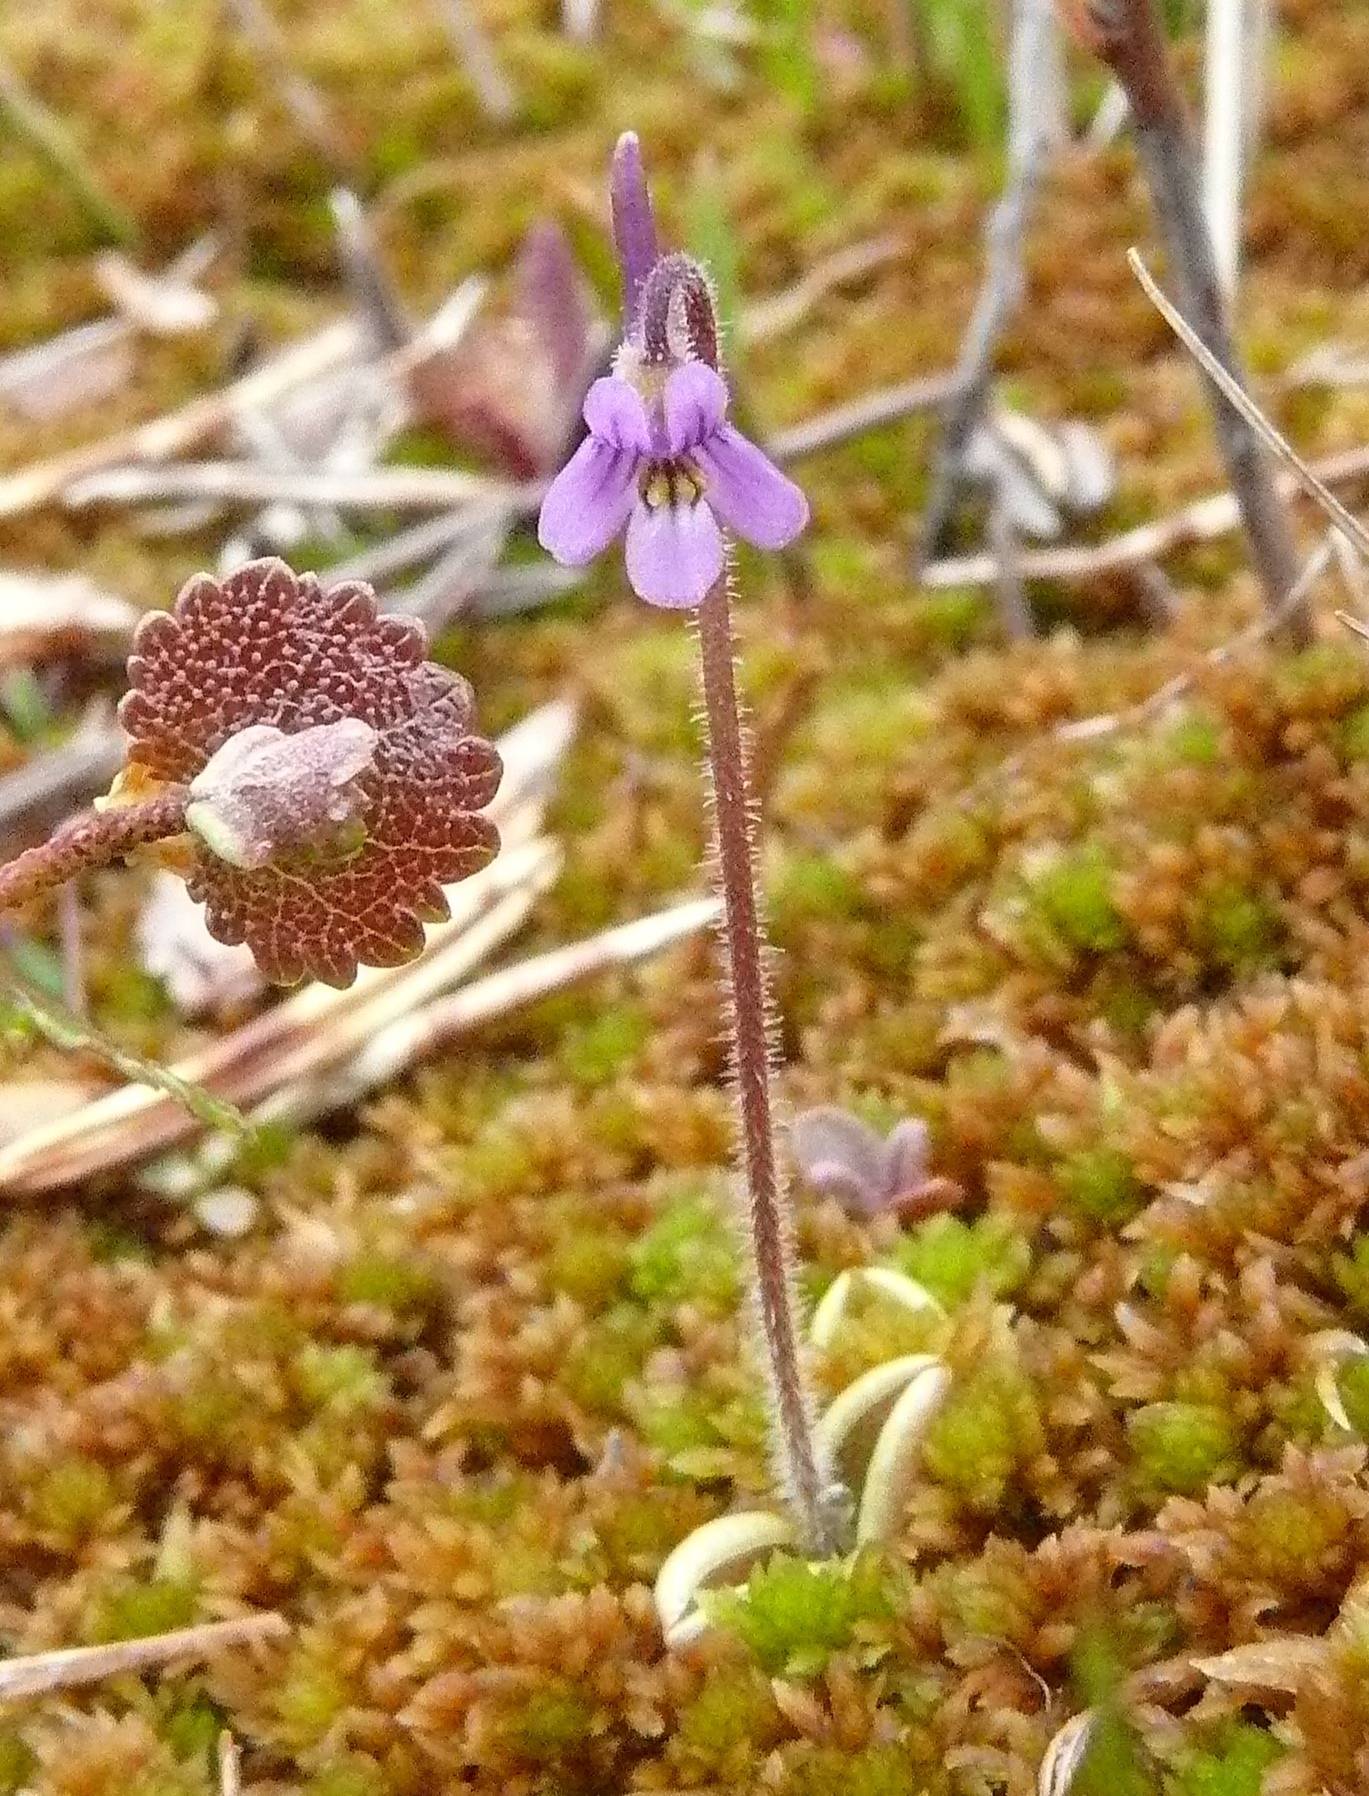 Hairy butterwort in blossom at Headquarters Lake, June 10, 2015. (Photo by Matt Bowser/USFWS)